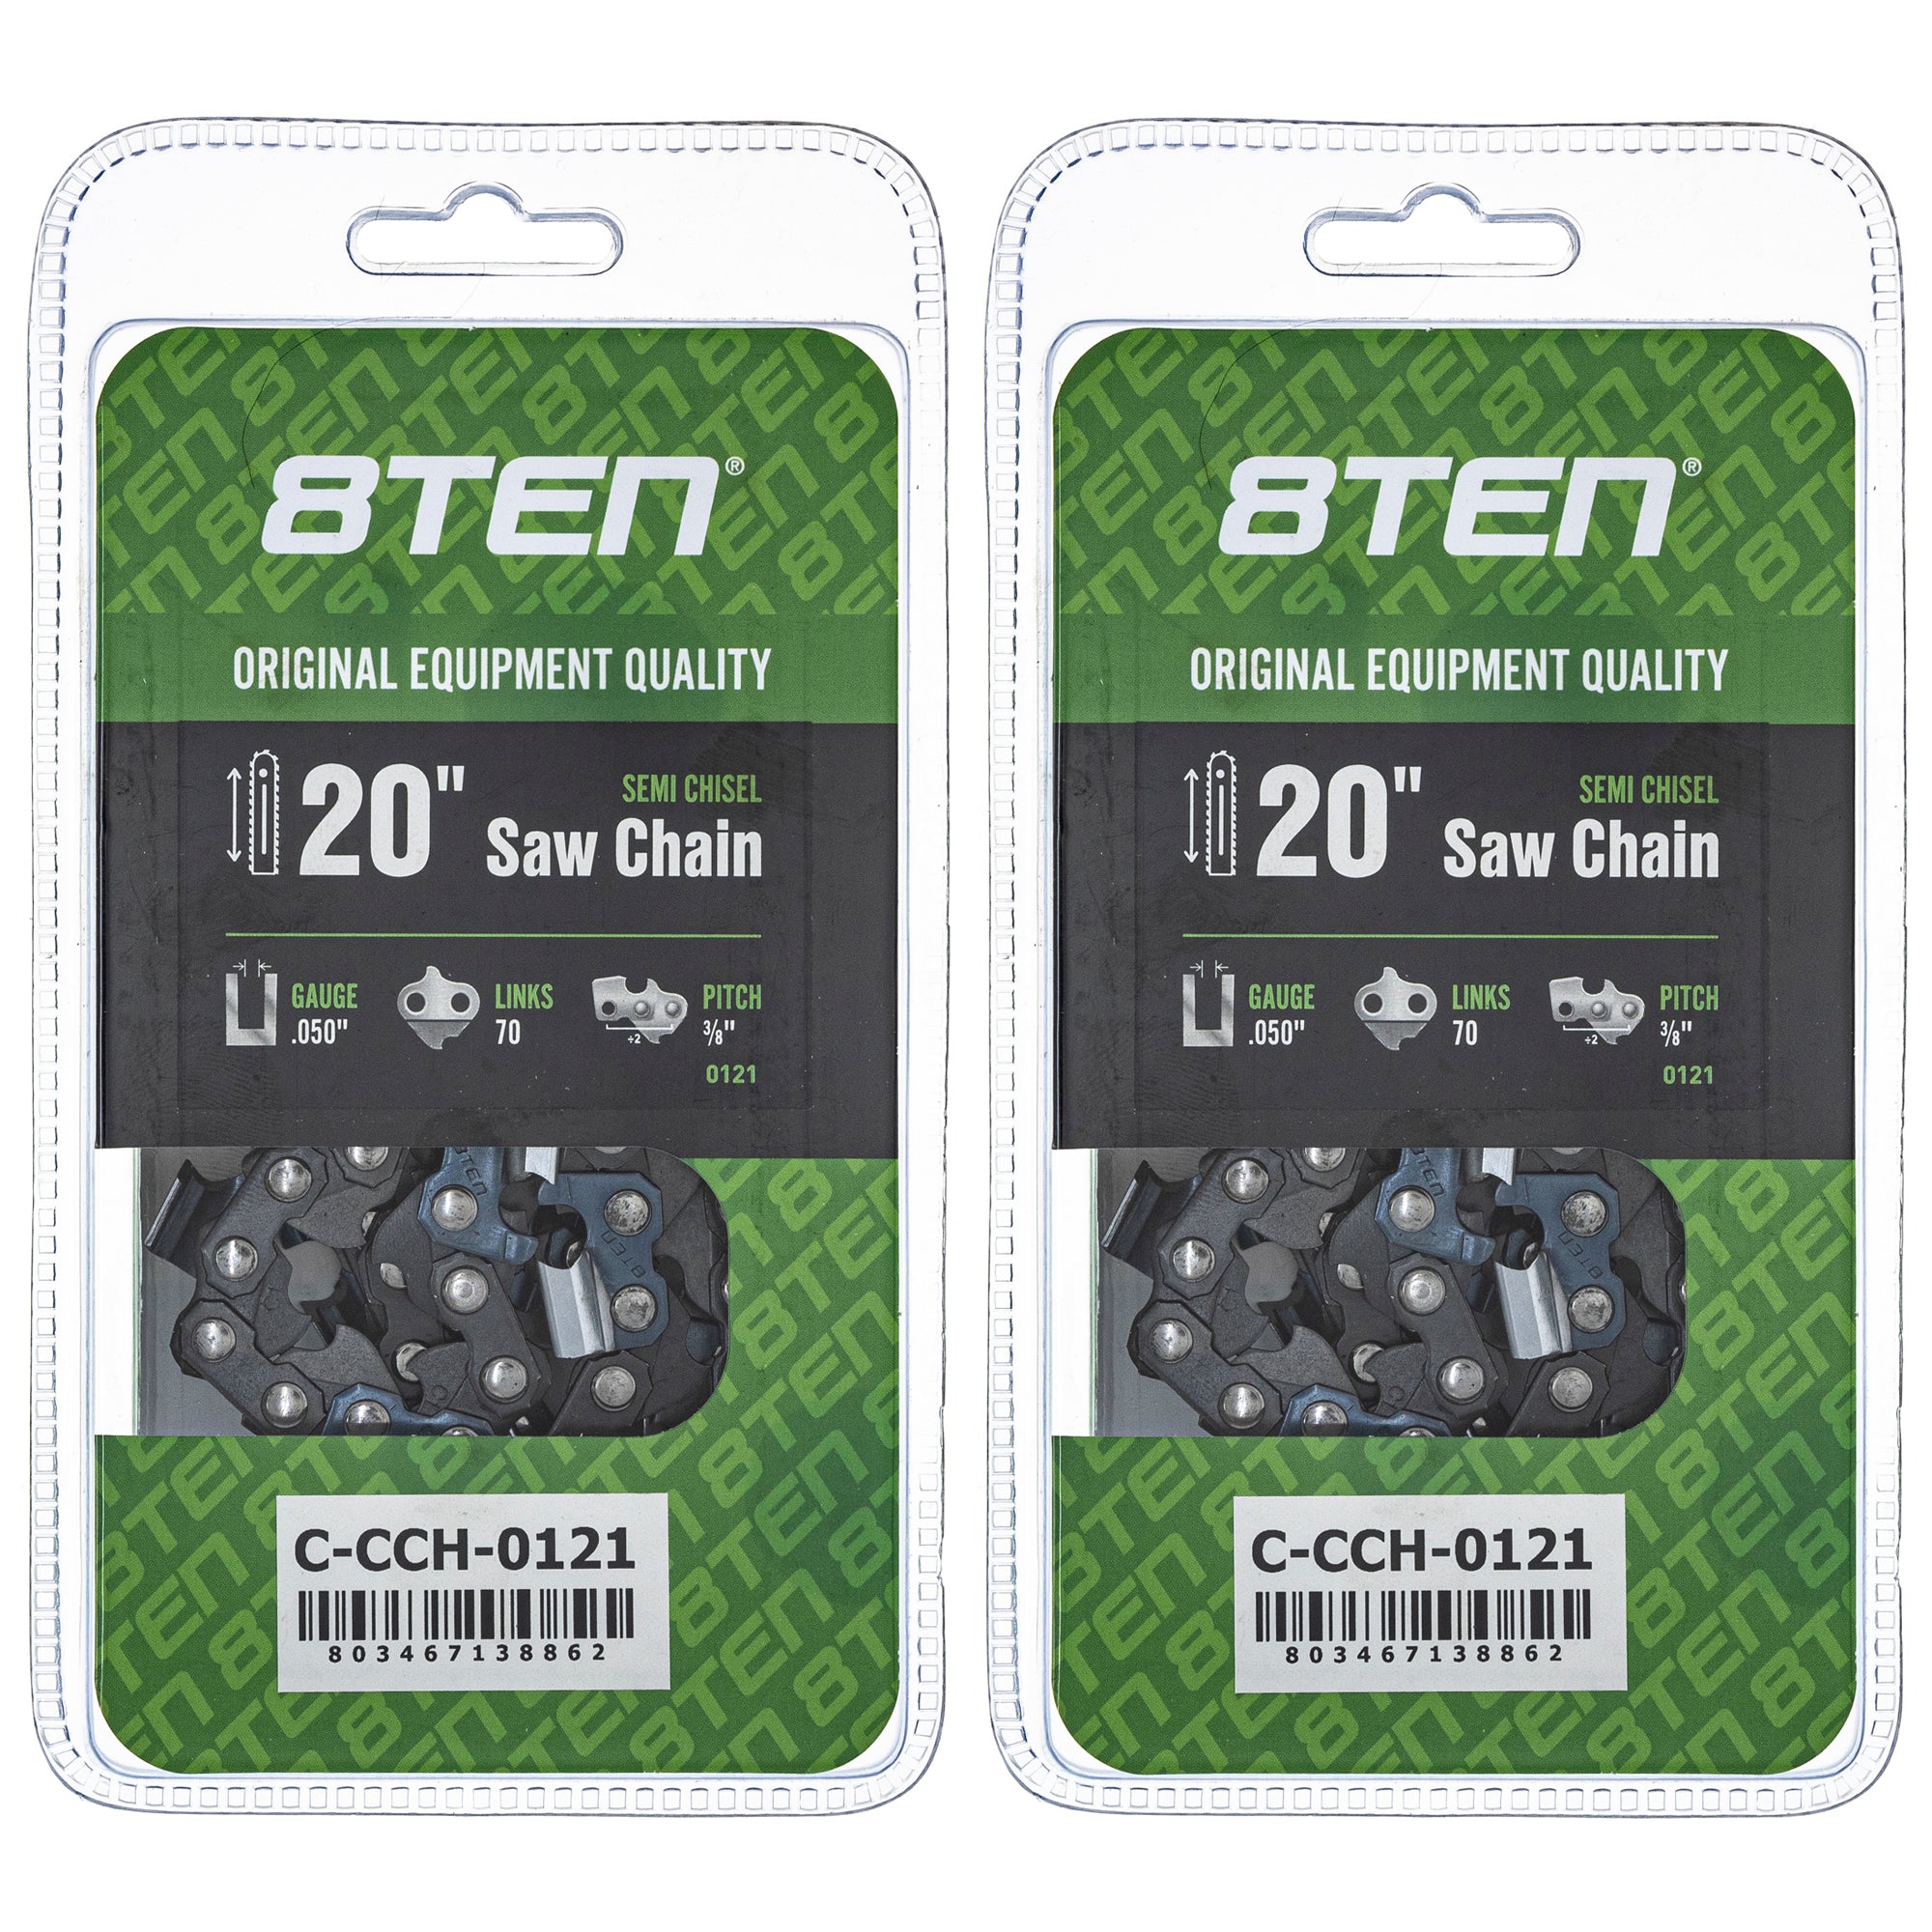 Chainsaw Chain 20 Inch .050 3/8 70DL 2-Pack for zOTHER Stens Ref No Oregon Ref. Oregon 8TEN 810-CCC2343H